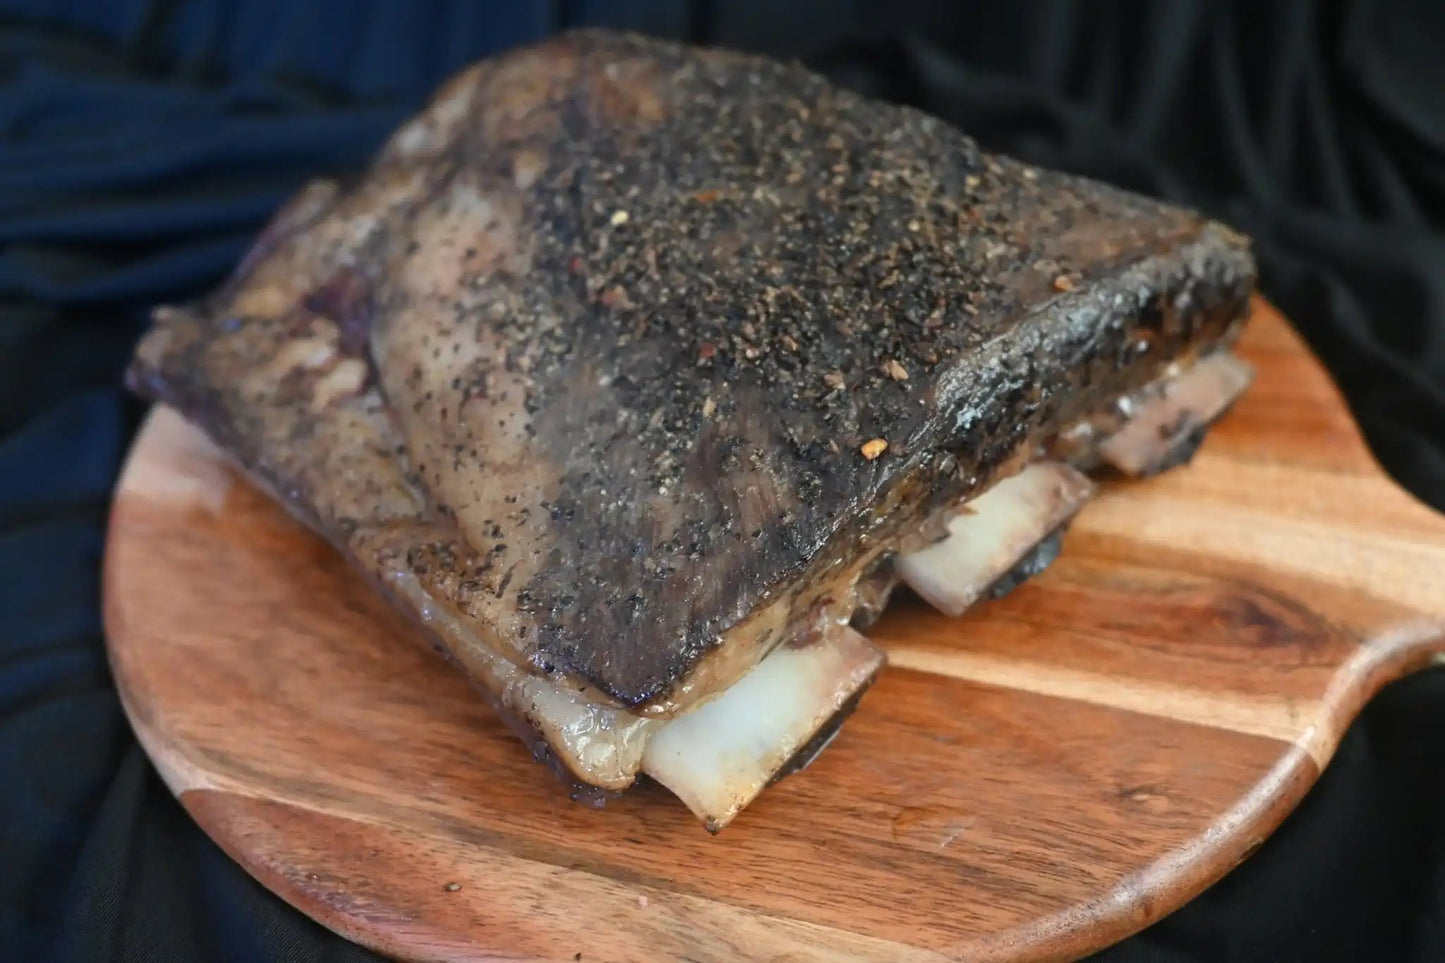 Pre-Smoked Wagyu Short RibsIndulge in the sumptuous goodness of our Pre-Smoked Wagyu Short Ribs, skillfully crafted by Koehler Meat and Sausage Co. These succulent, tender ribs have been experPre-Smoked Wagyu Short RibsThe Hufeisen-Ranch (WYO Wagyu)